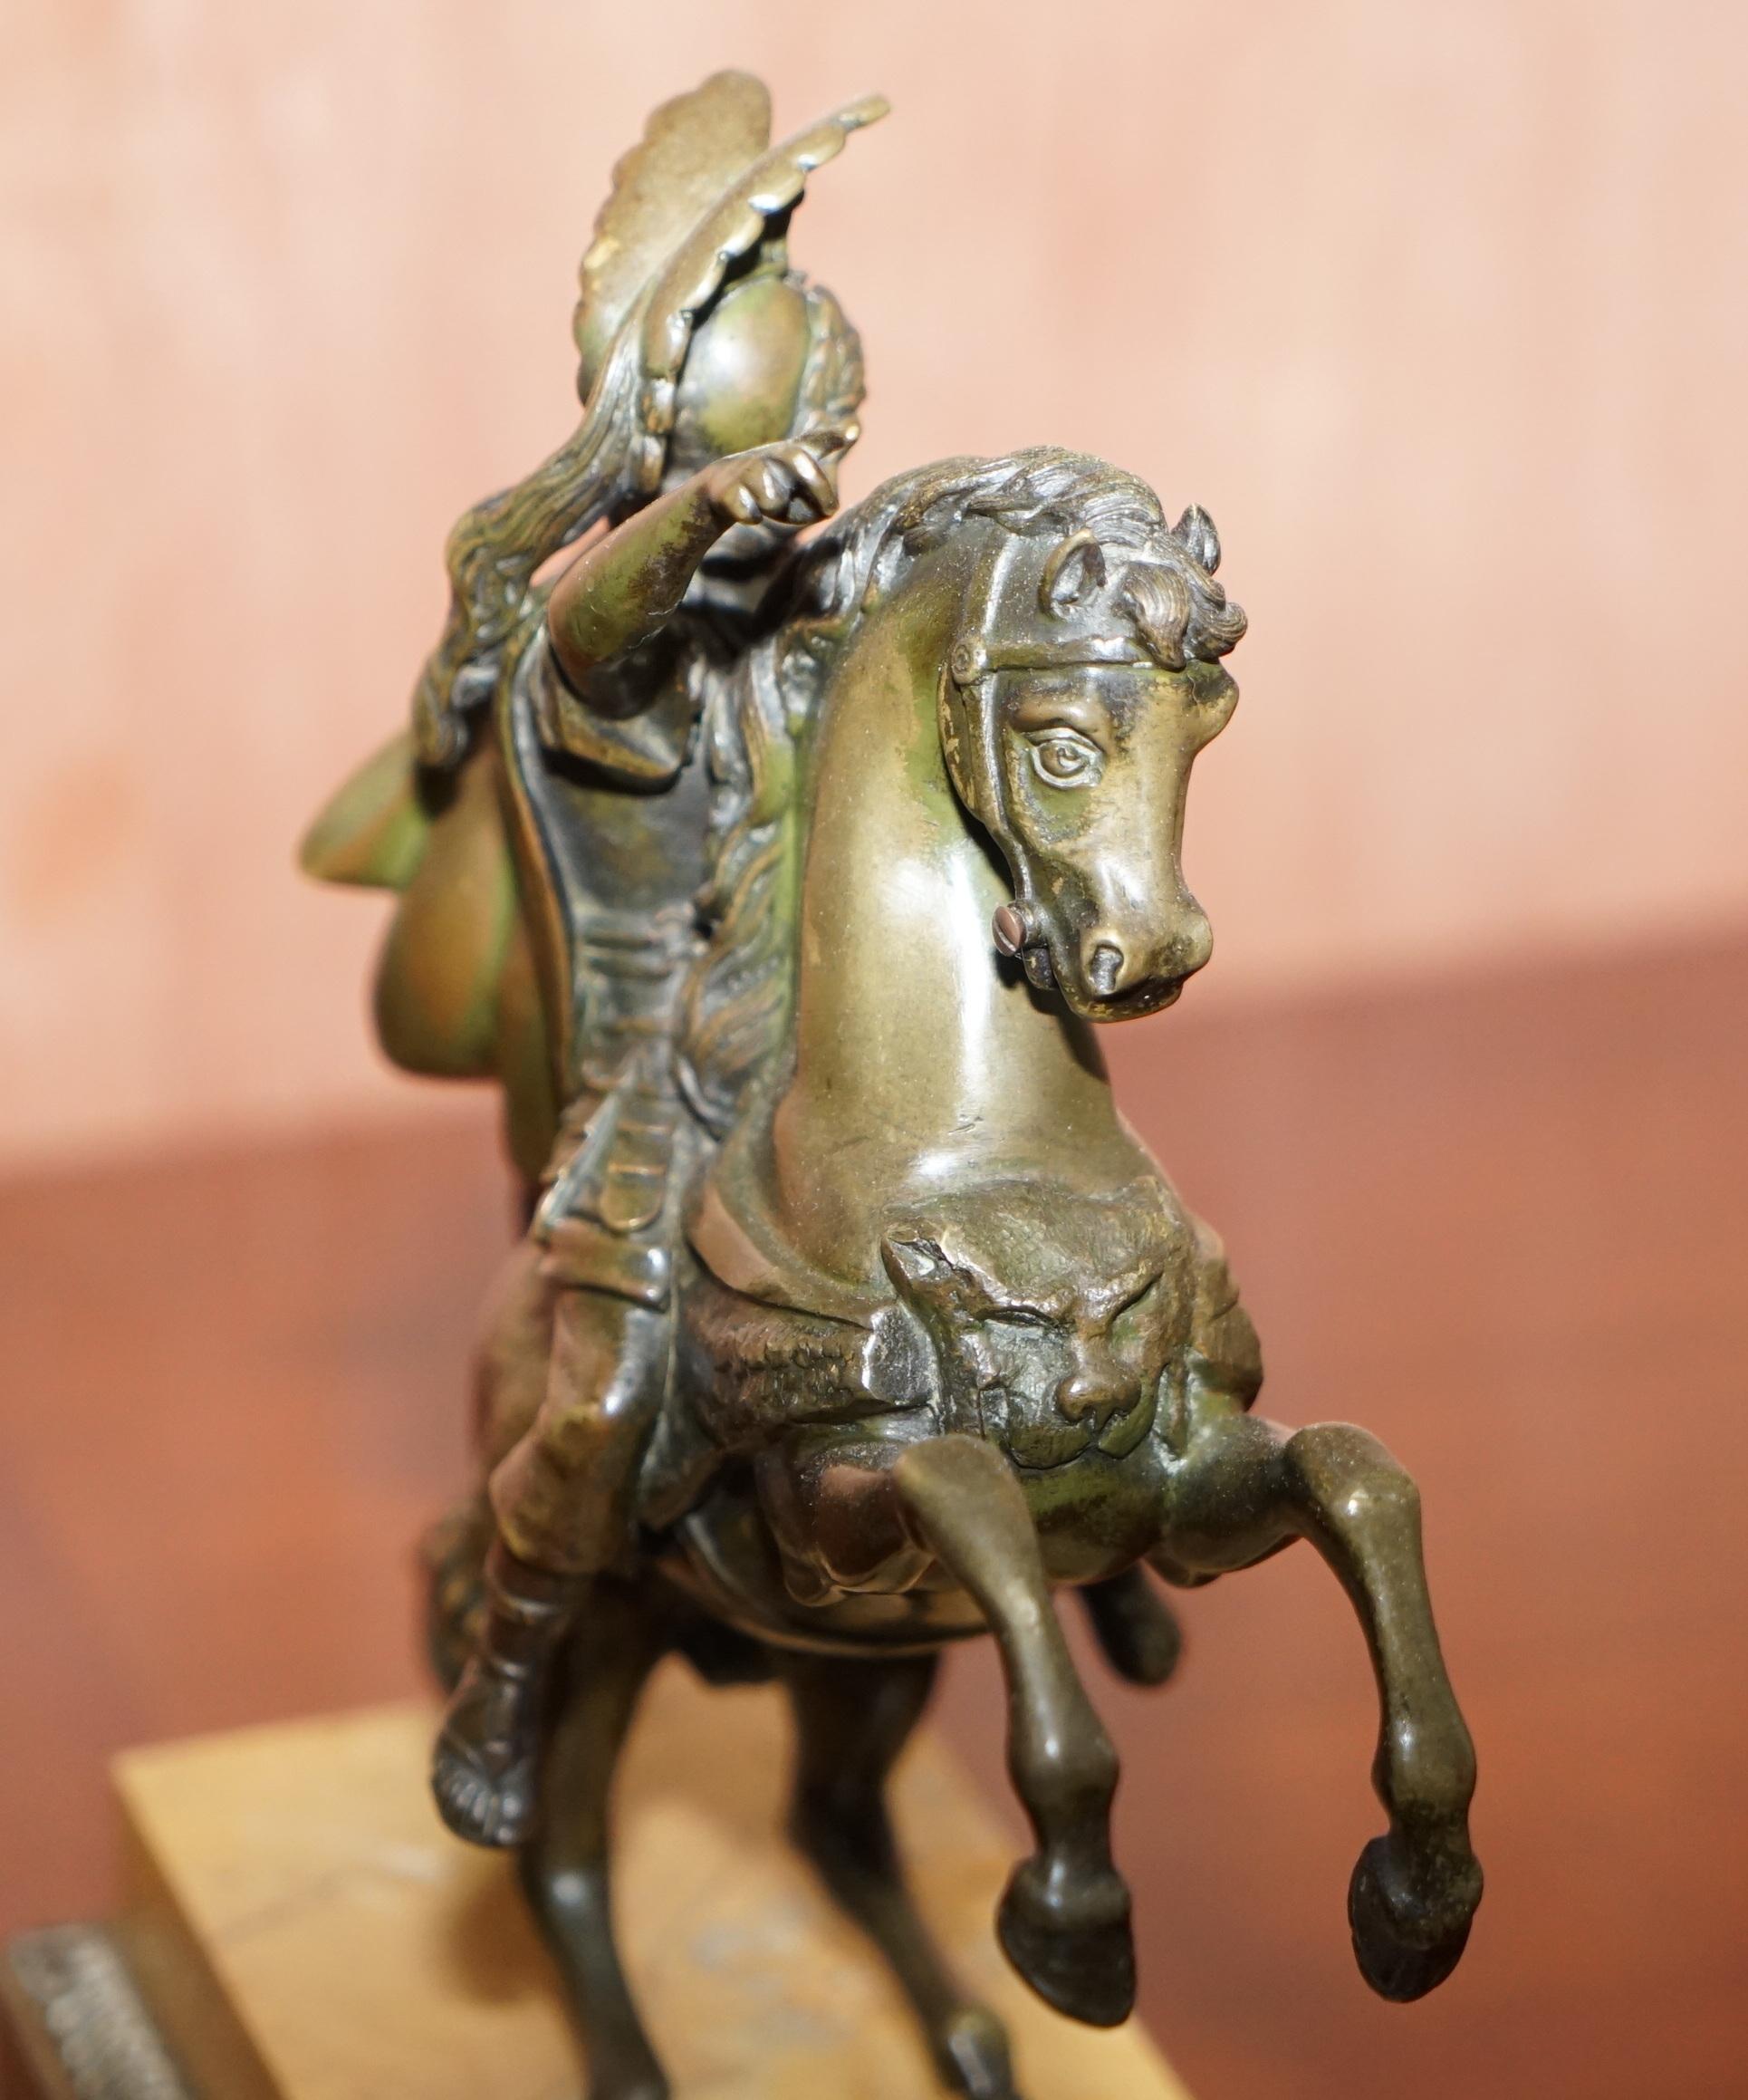 Hand-Crafted Pair of 19th Century Equestrian Bronzes Russian Cossack & Roman Solider Horses For Sale